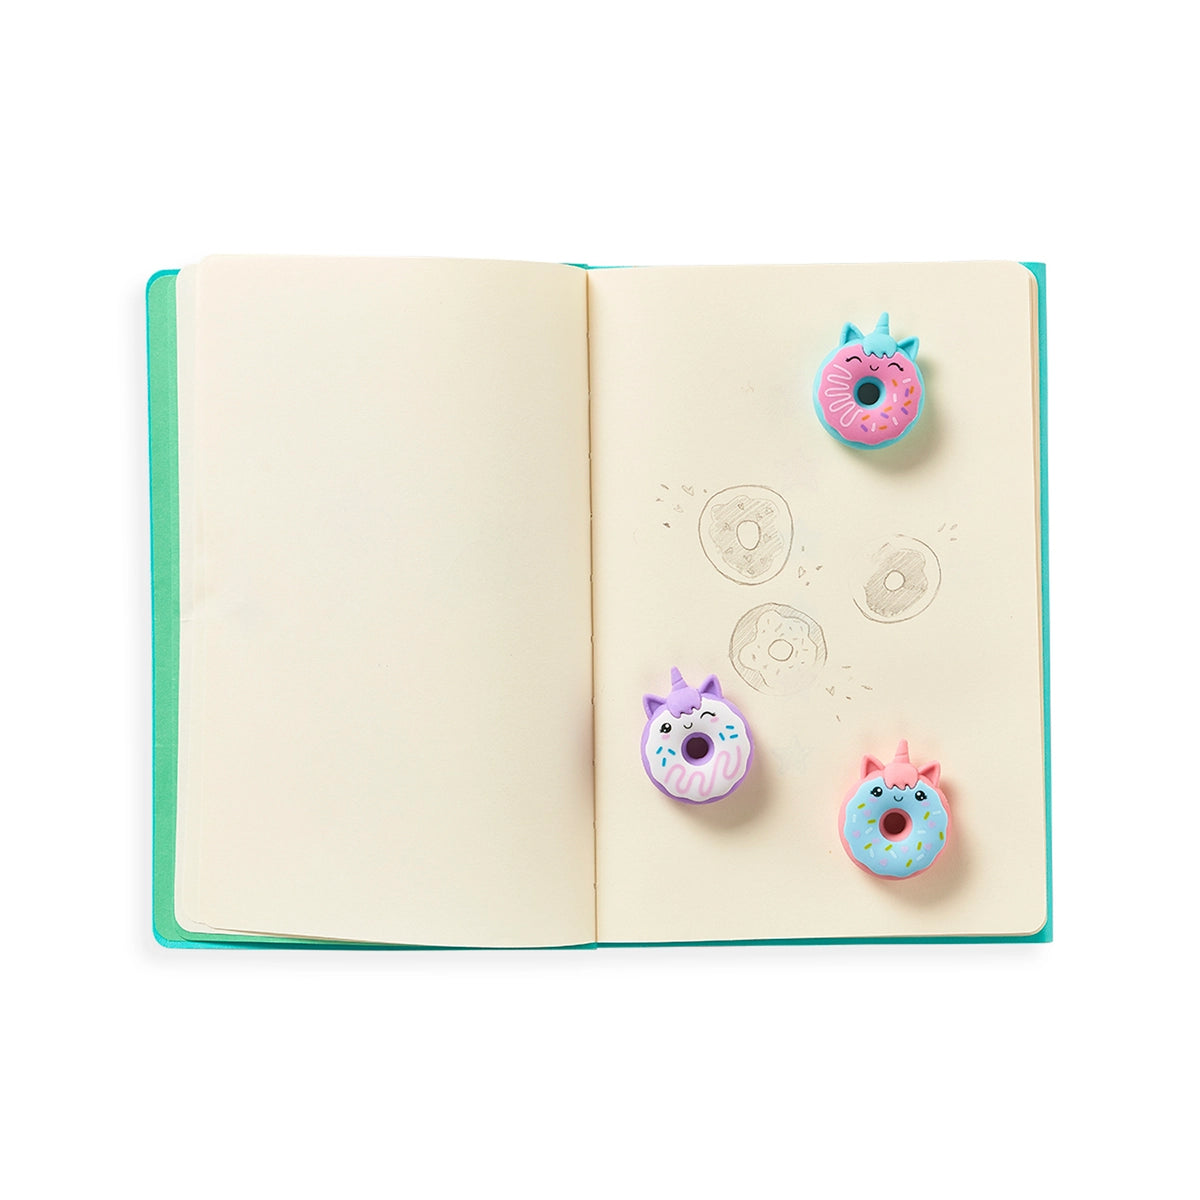 Magic Bakery Unicorn Donuts Scented Erasers - Set of 3 - FINAL SALE